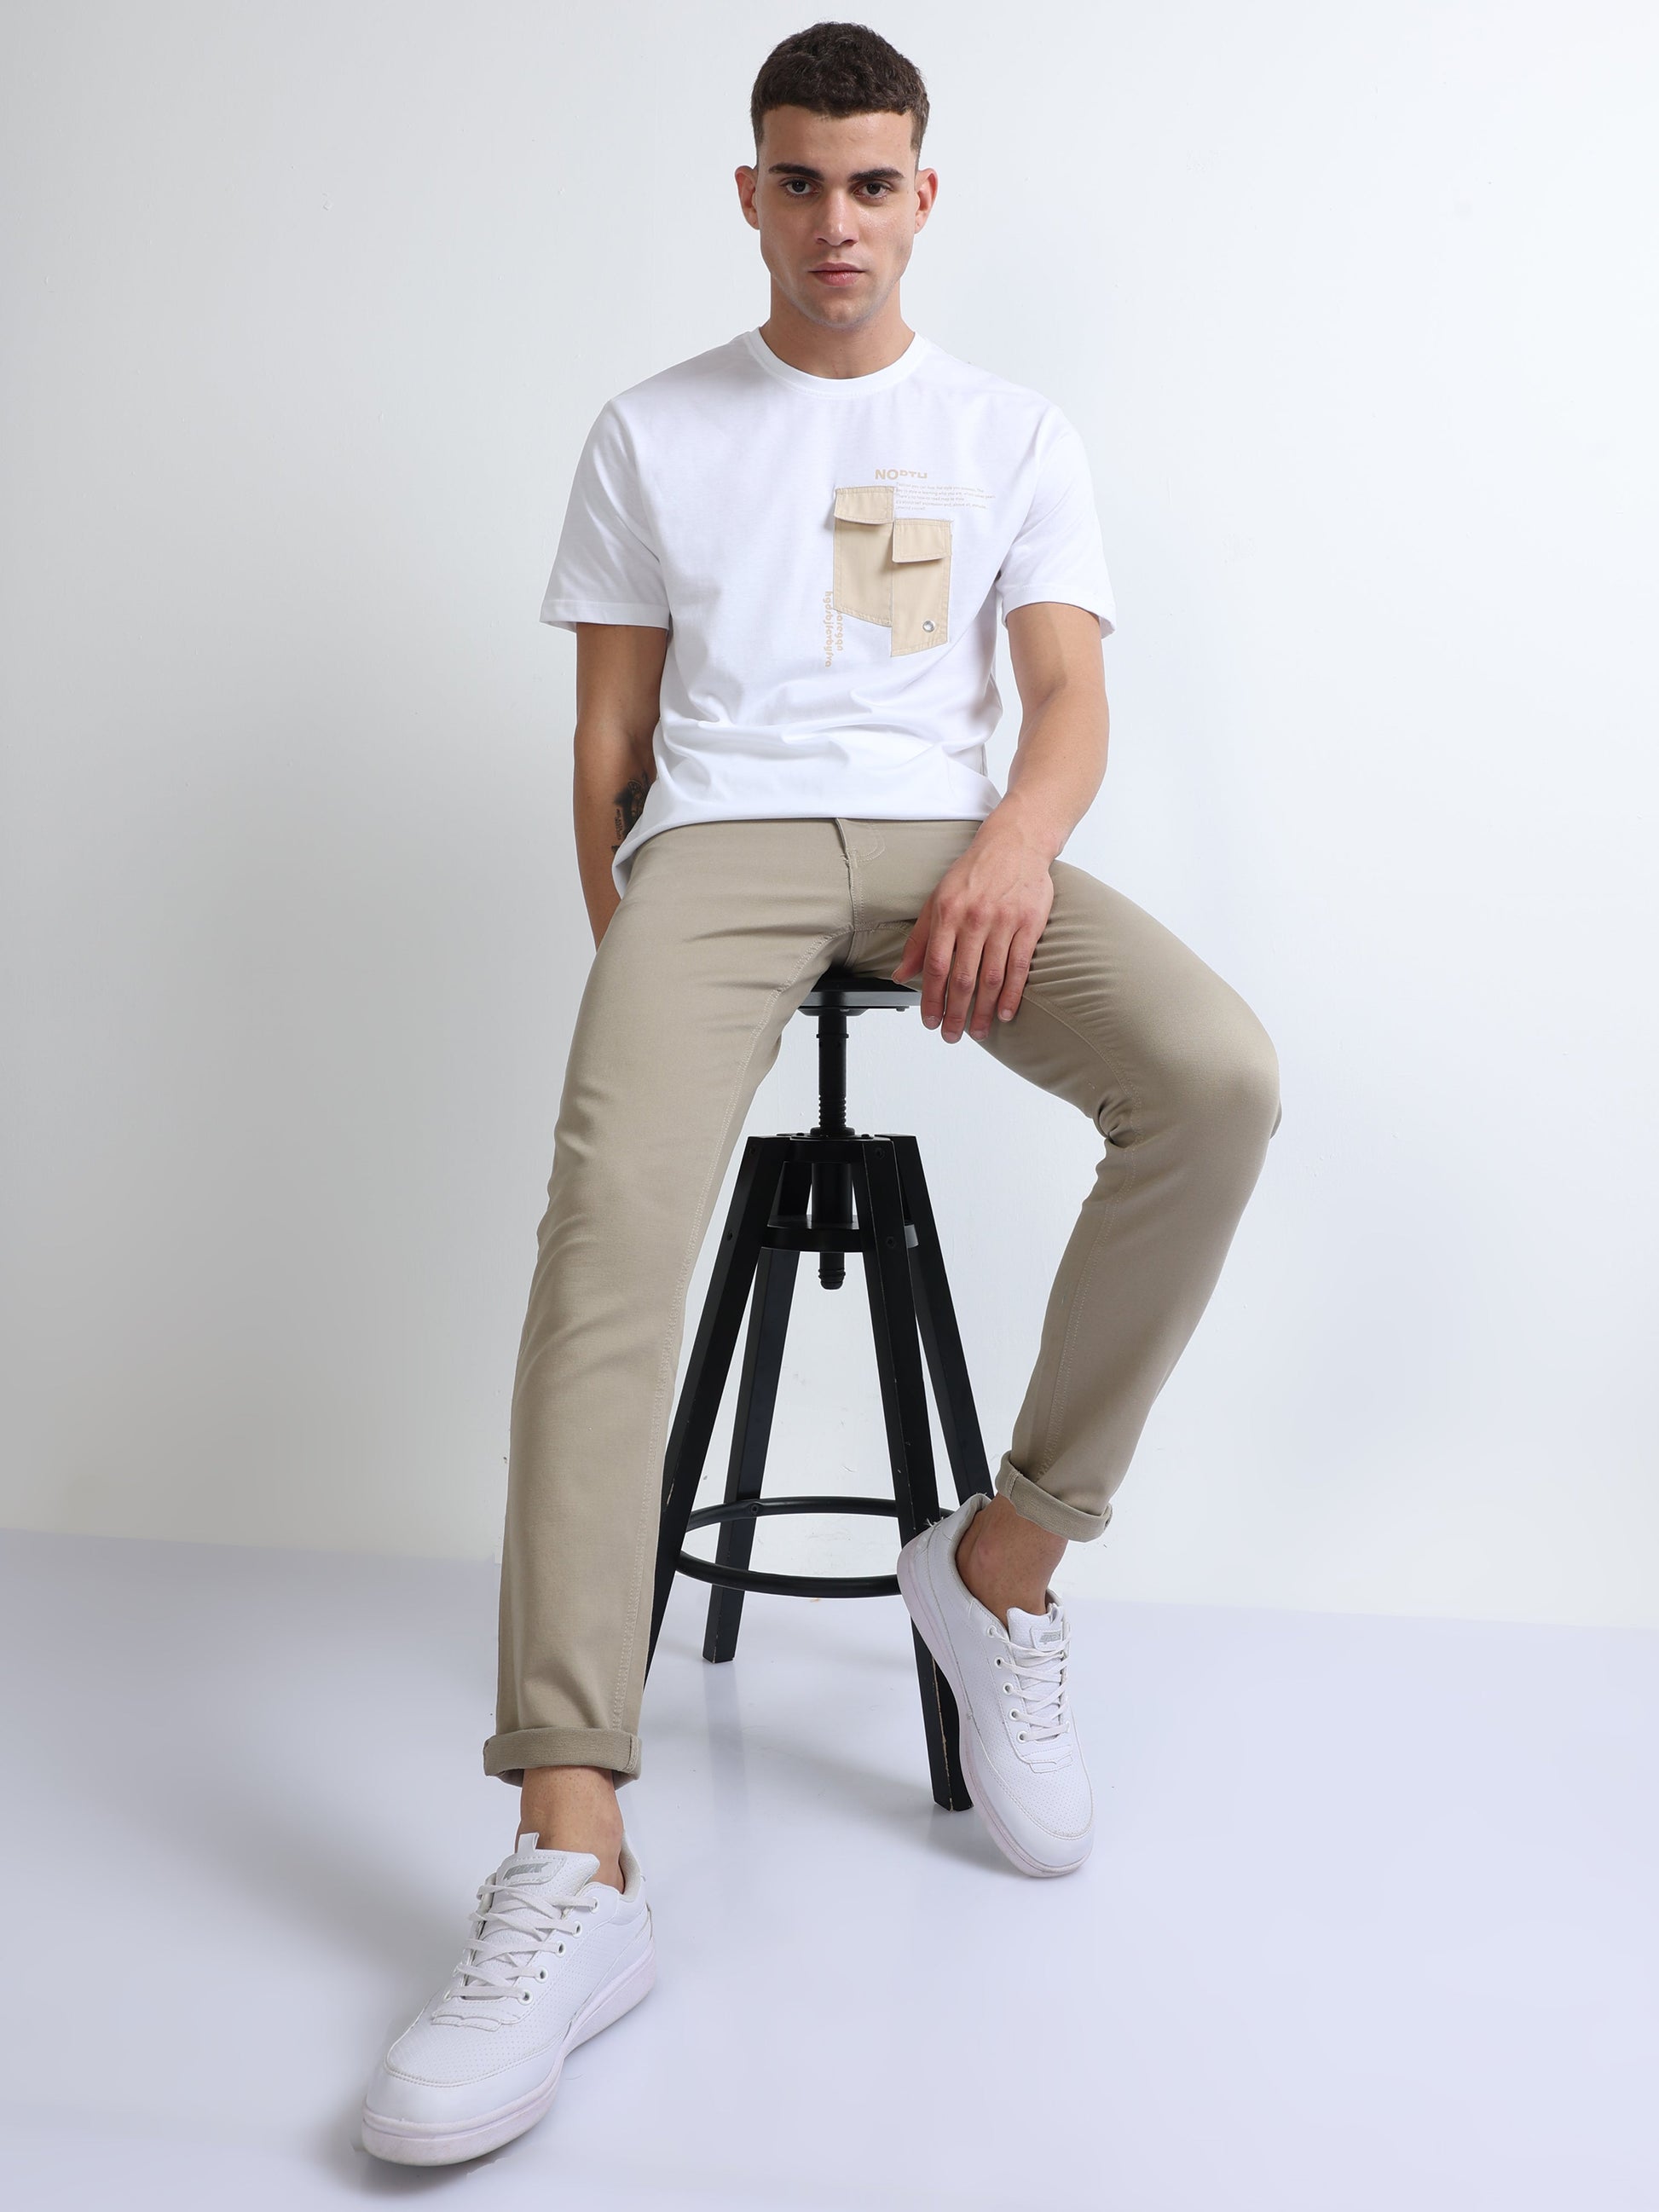 Buy Casual Cotton Stretch Trousers Online.